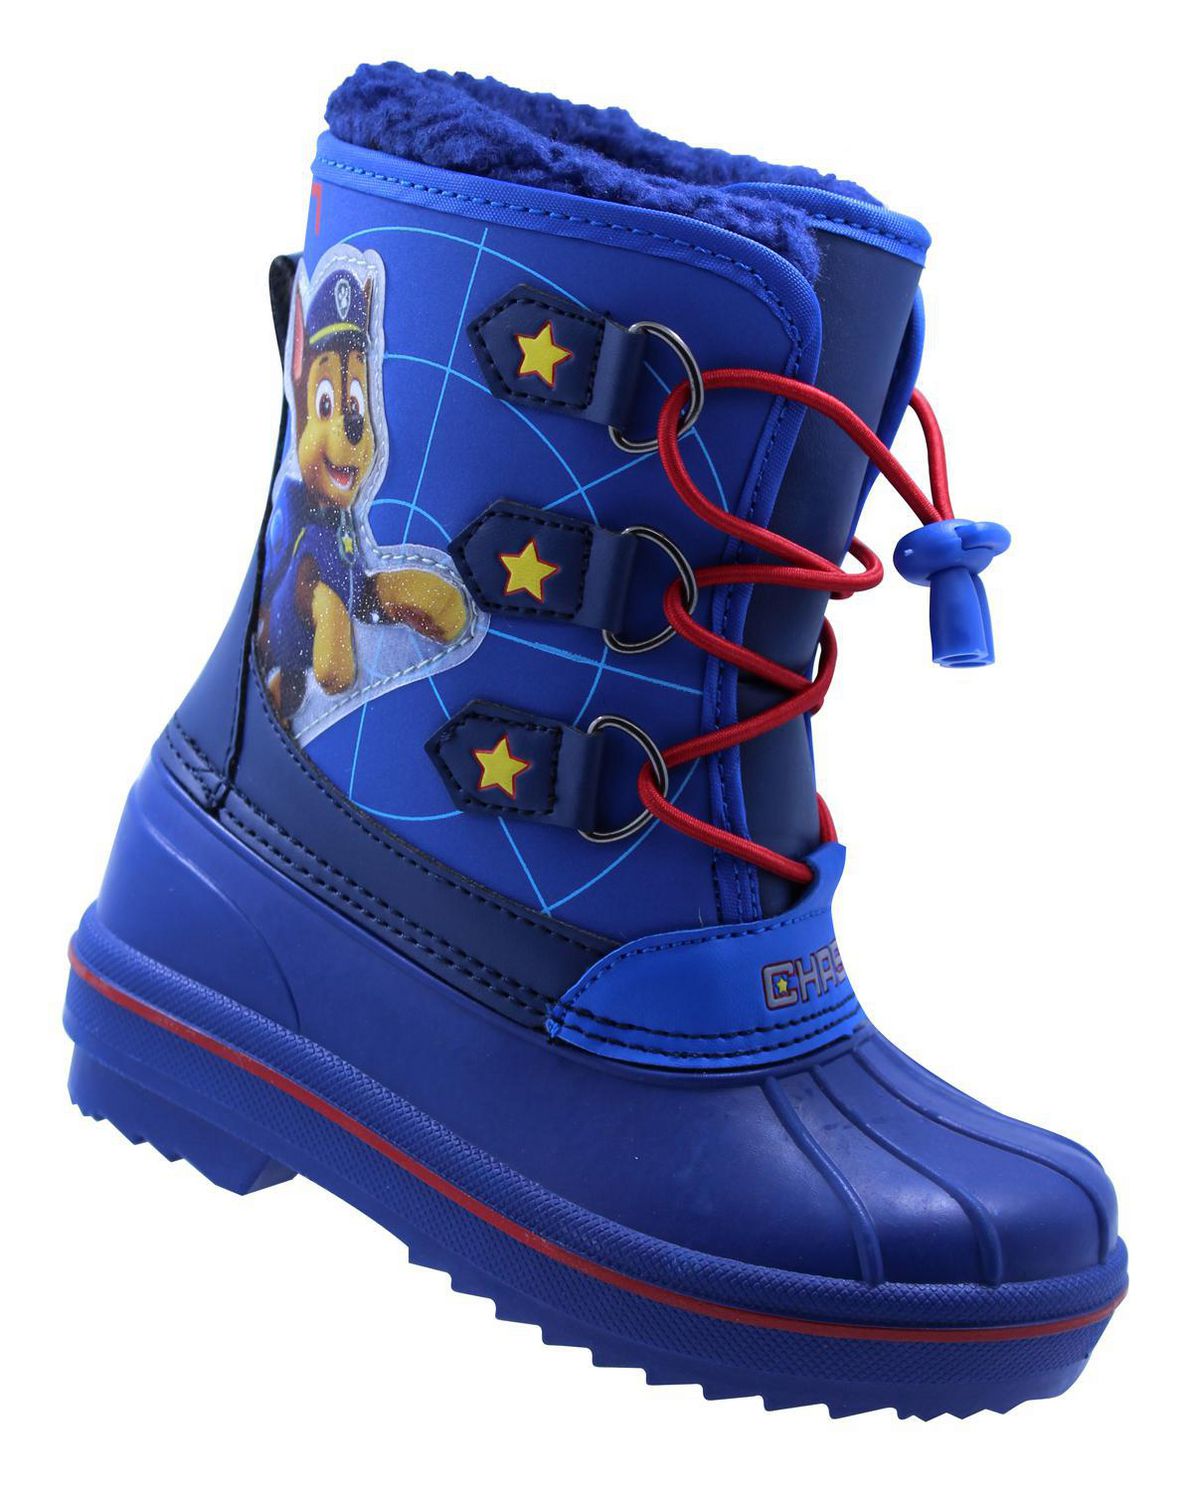 Paw Patrol Winter Boots for Toddler 